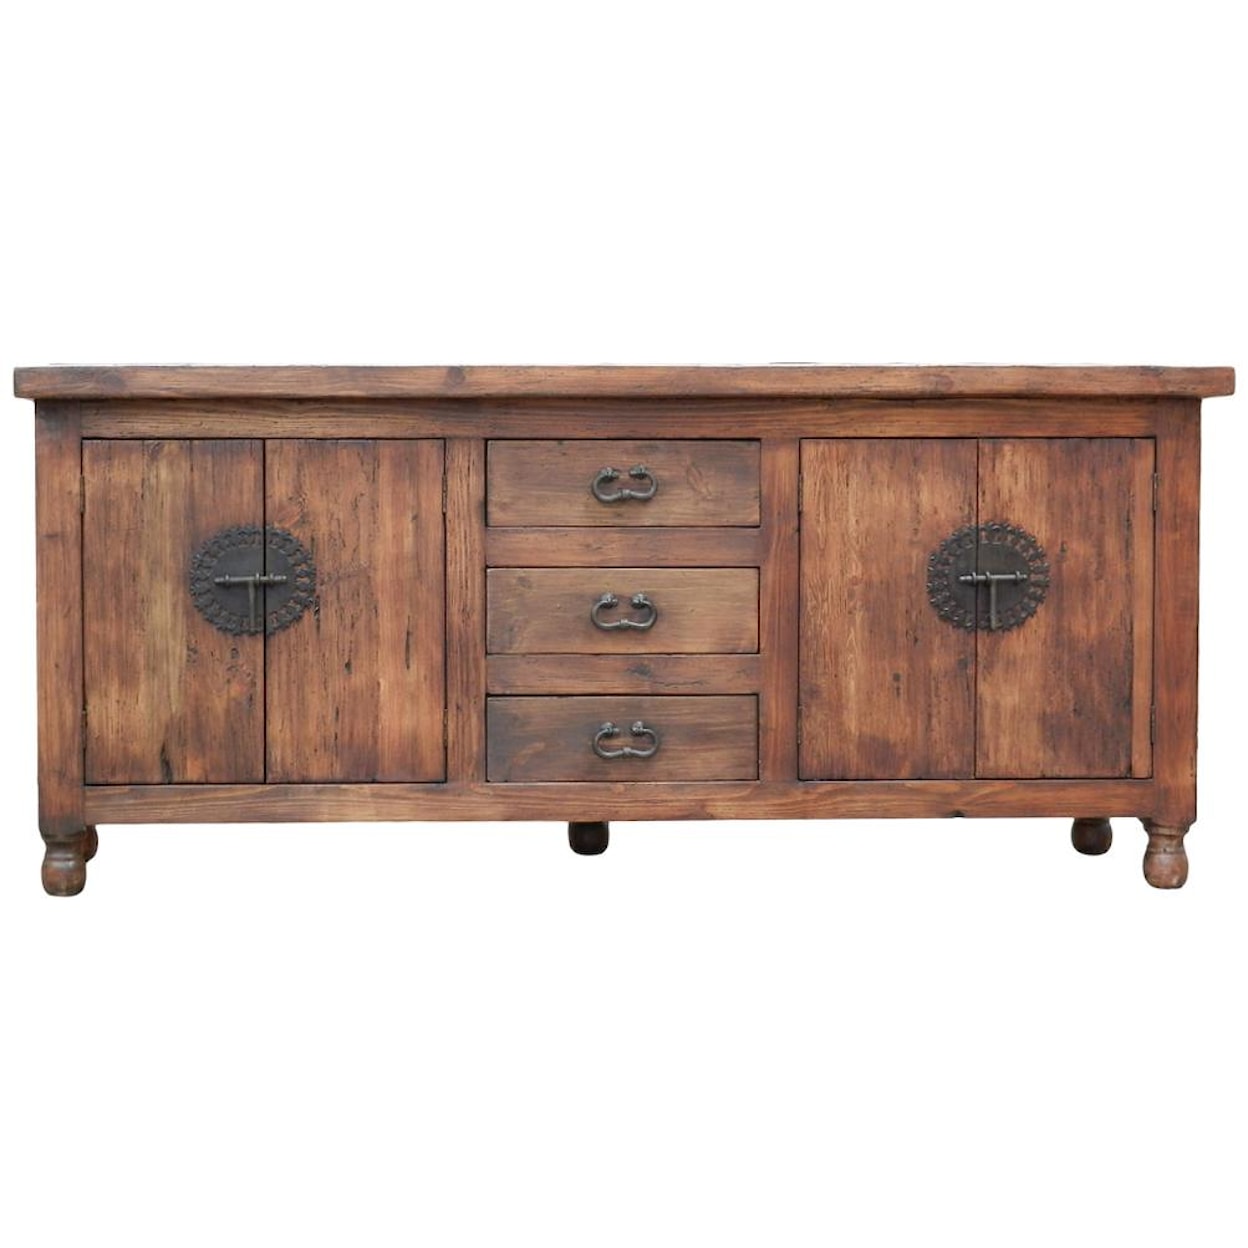 Furniture Source International Occasional Tables Thorton Console